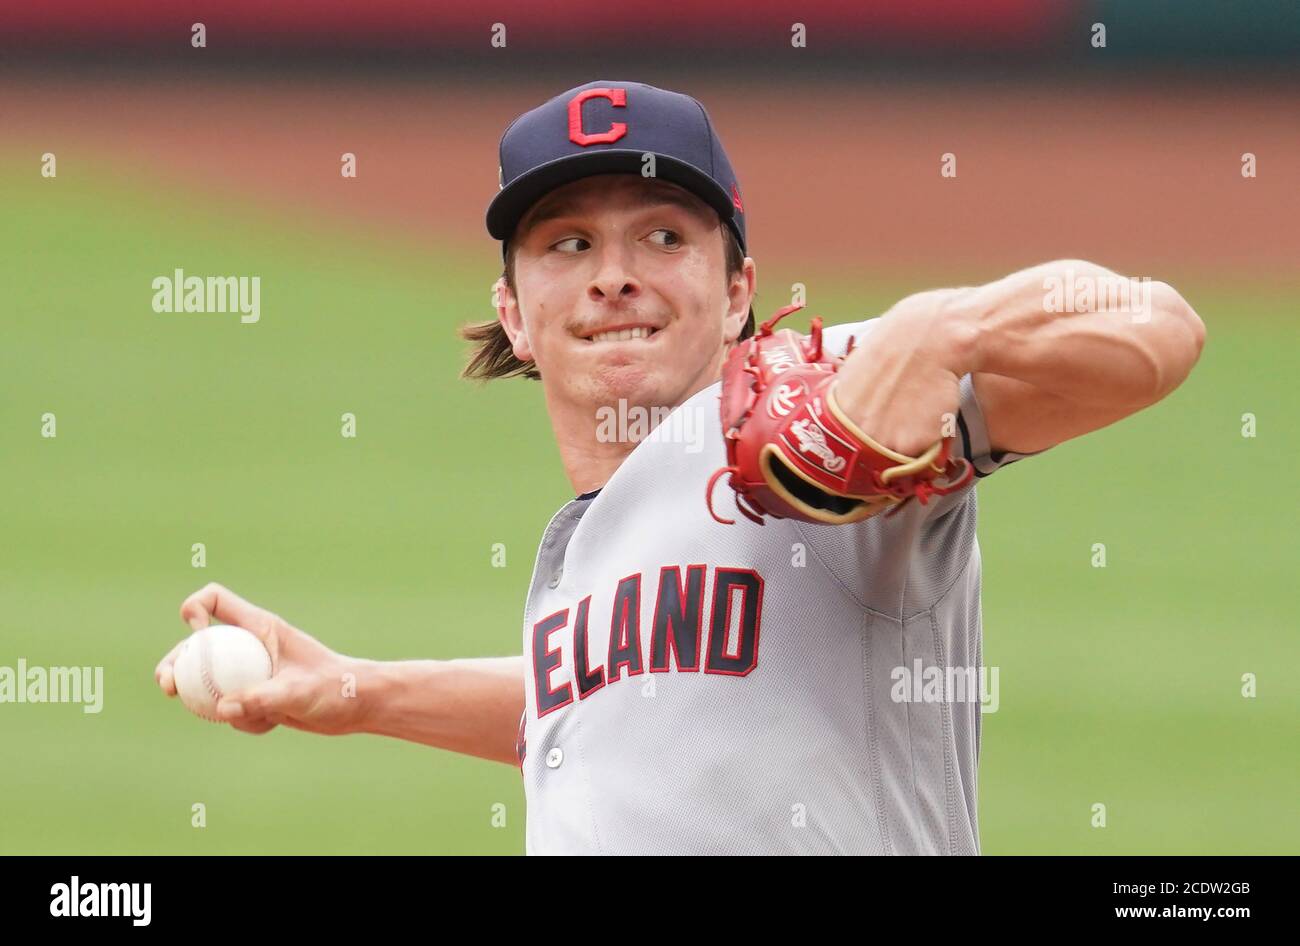 Cleveland Indians relief pitcher James Karinchak warms up in